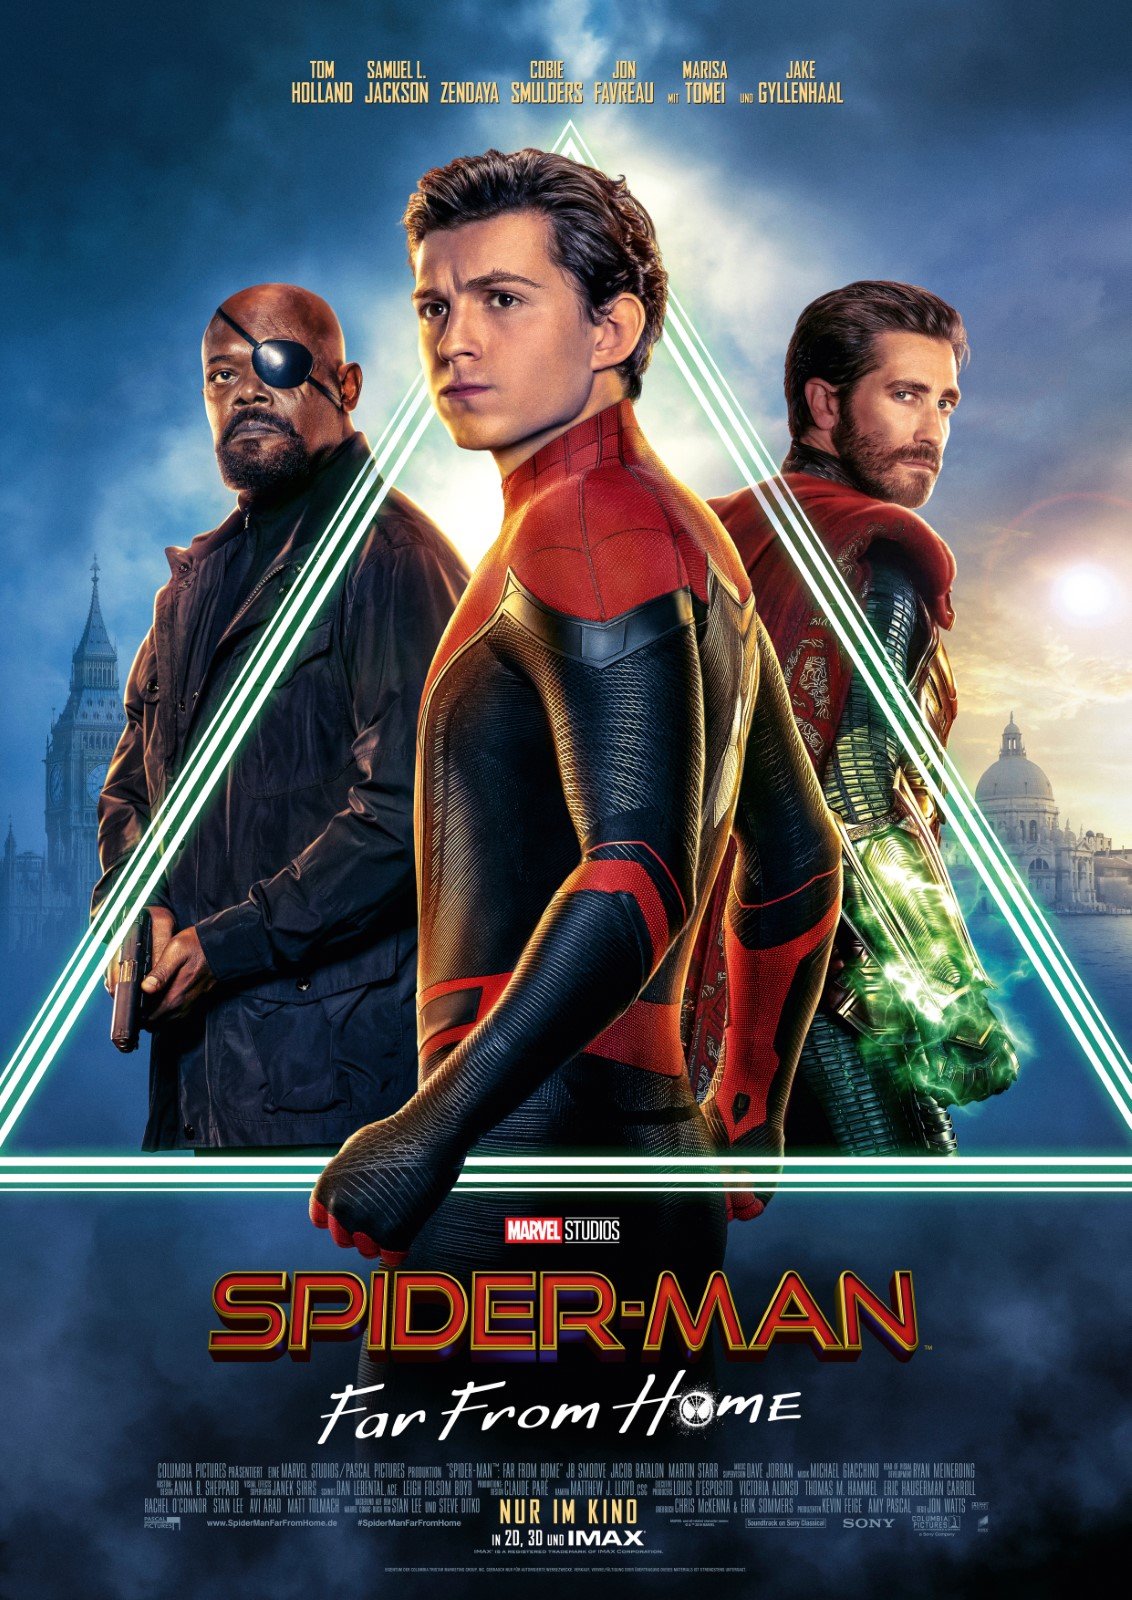 SPIDER MAN FAR FROM HOME SYNOPSIS SPOILERS